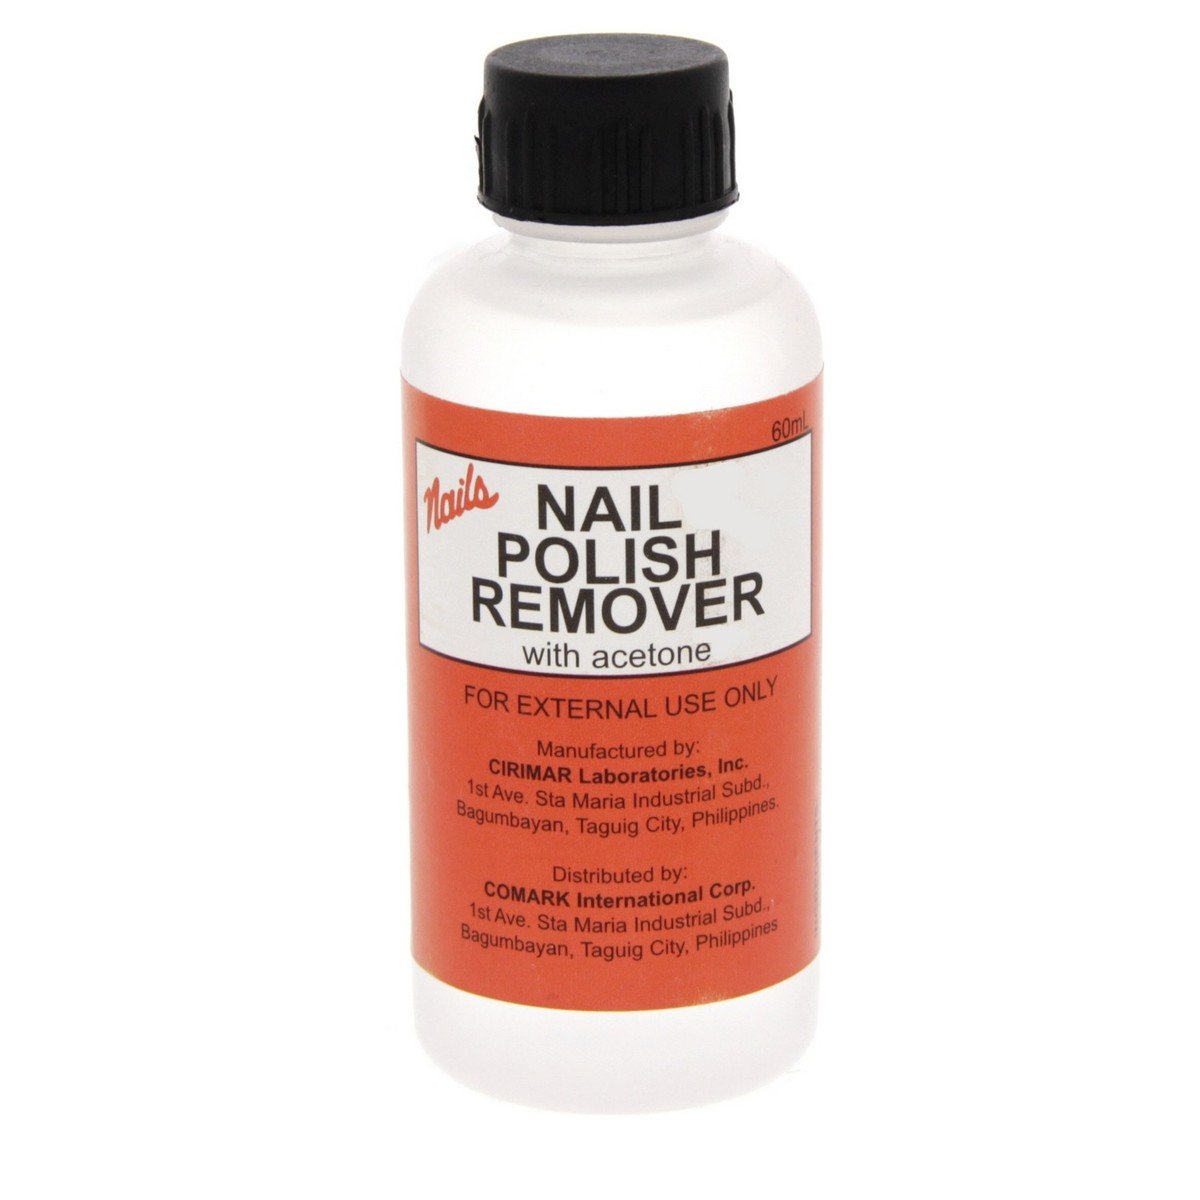 Nails Nail Polish Remover With Acetone, 60 ml